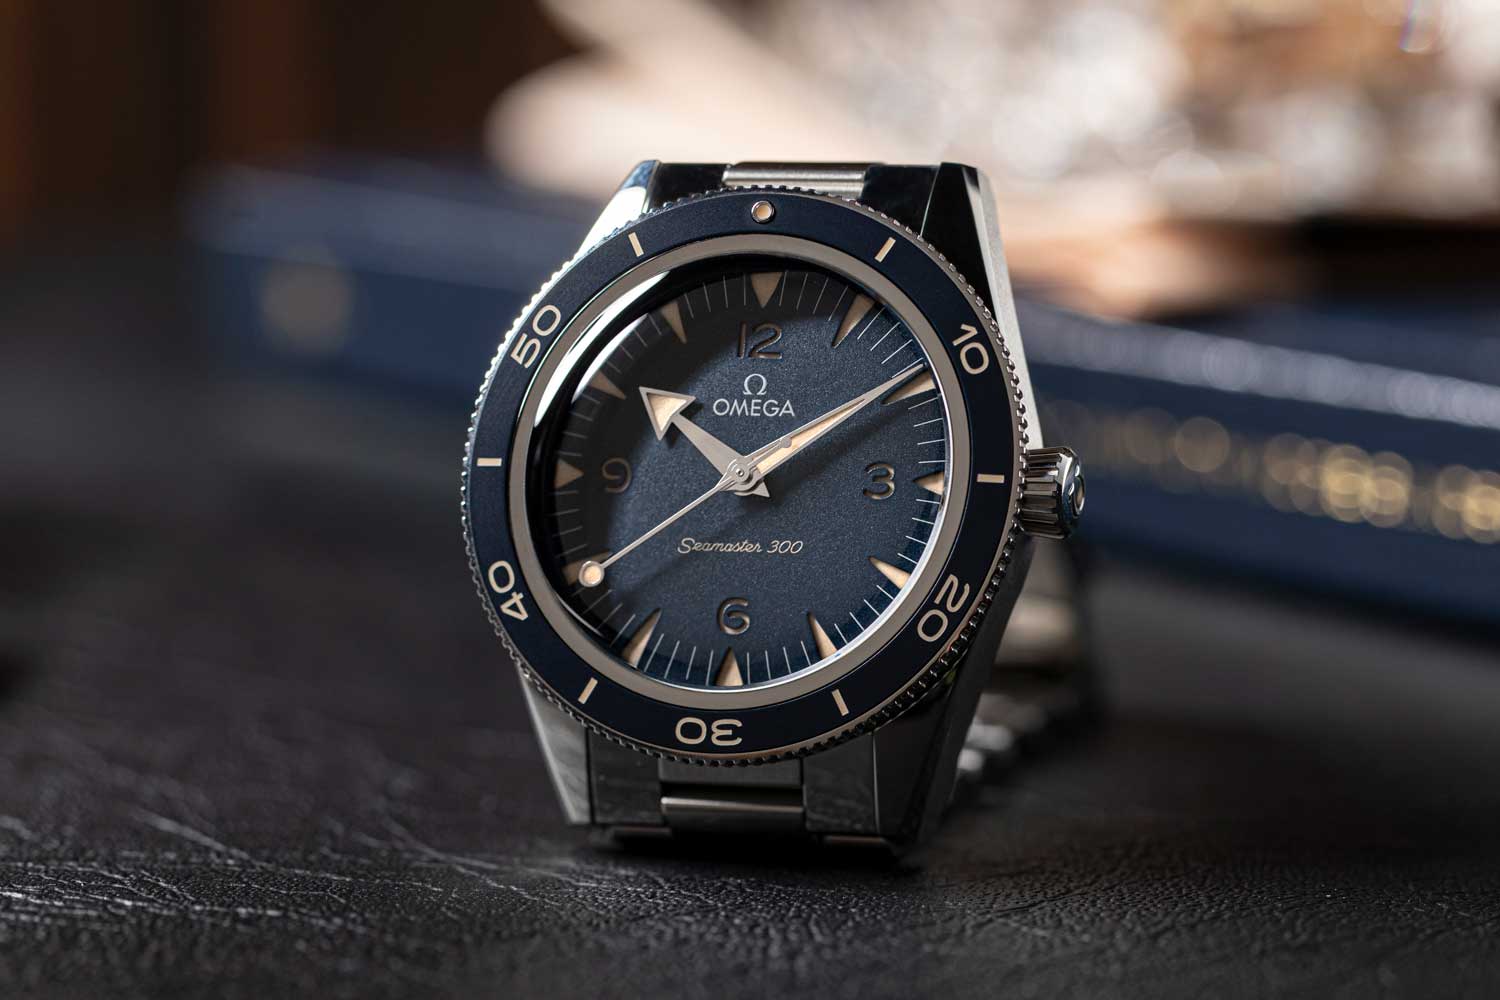 All the new Seamasters feature Omega’s famous Co-Axial escapement and come with a warranty of five years. (©Revolution)